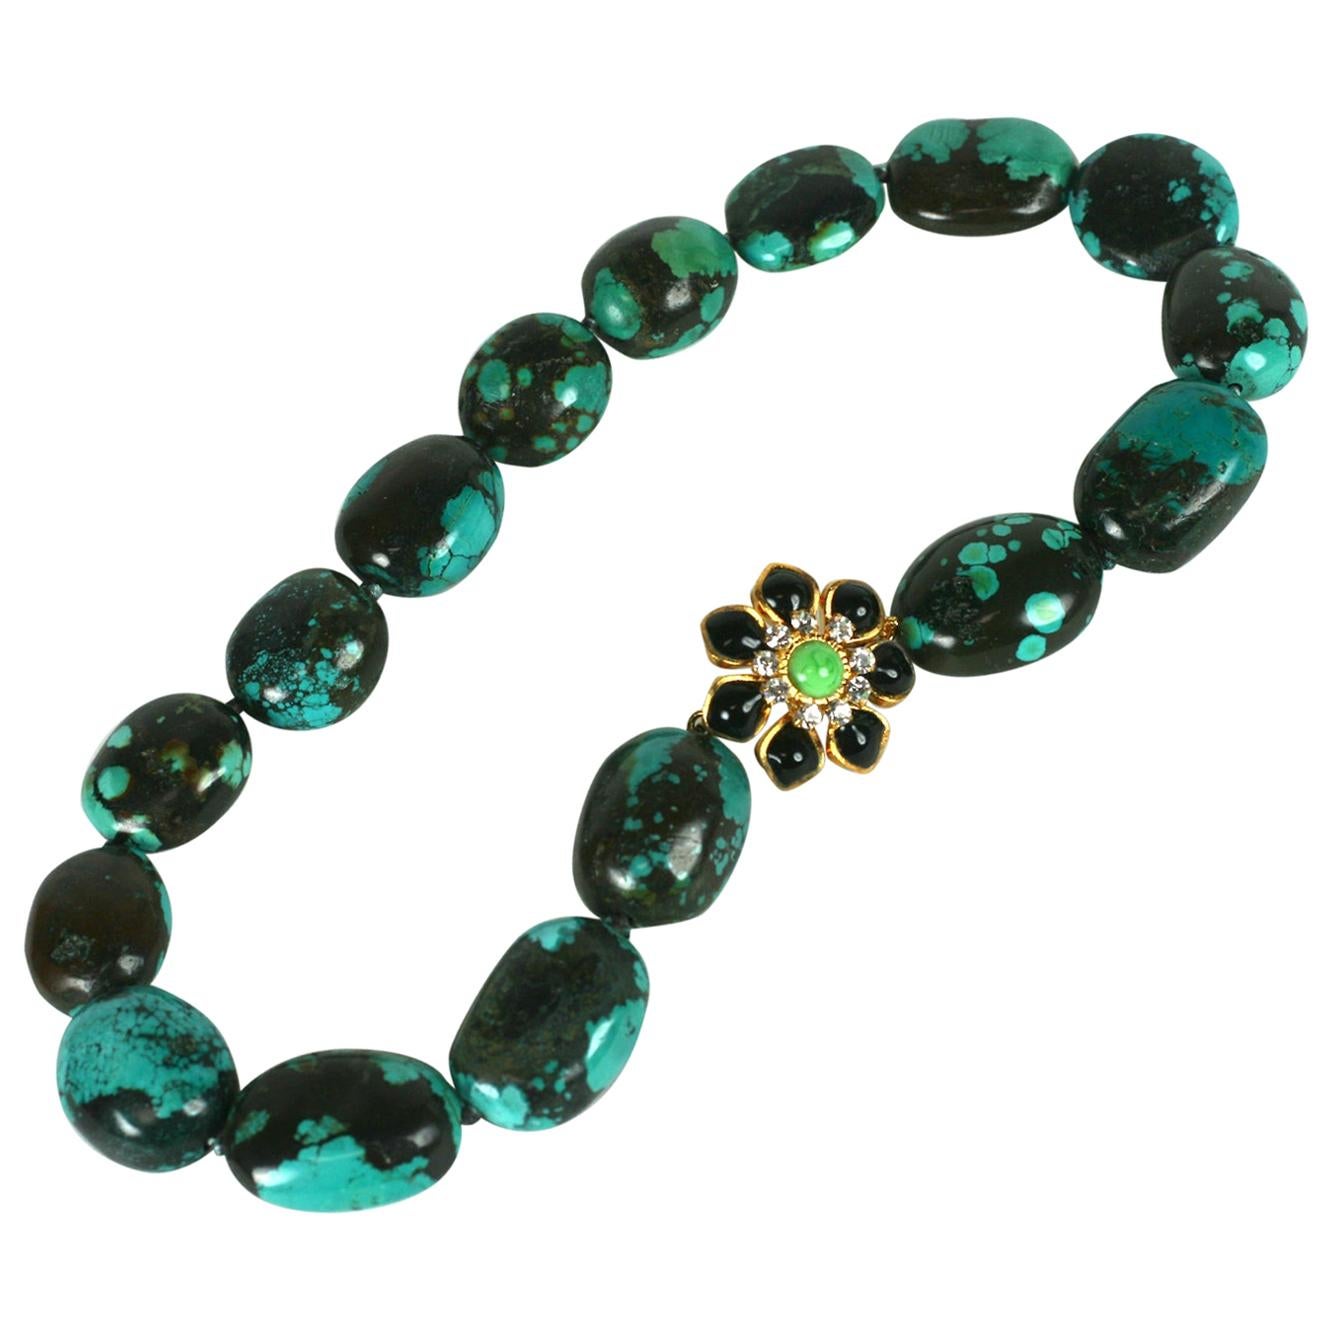 Matrix Turquoise and Poured Glass Marguerite Necklace, MWLC